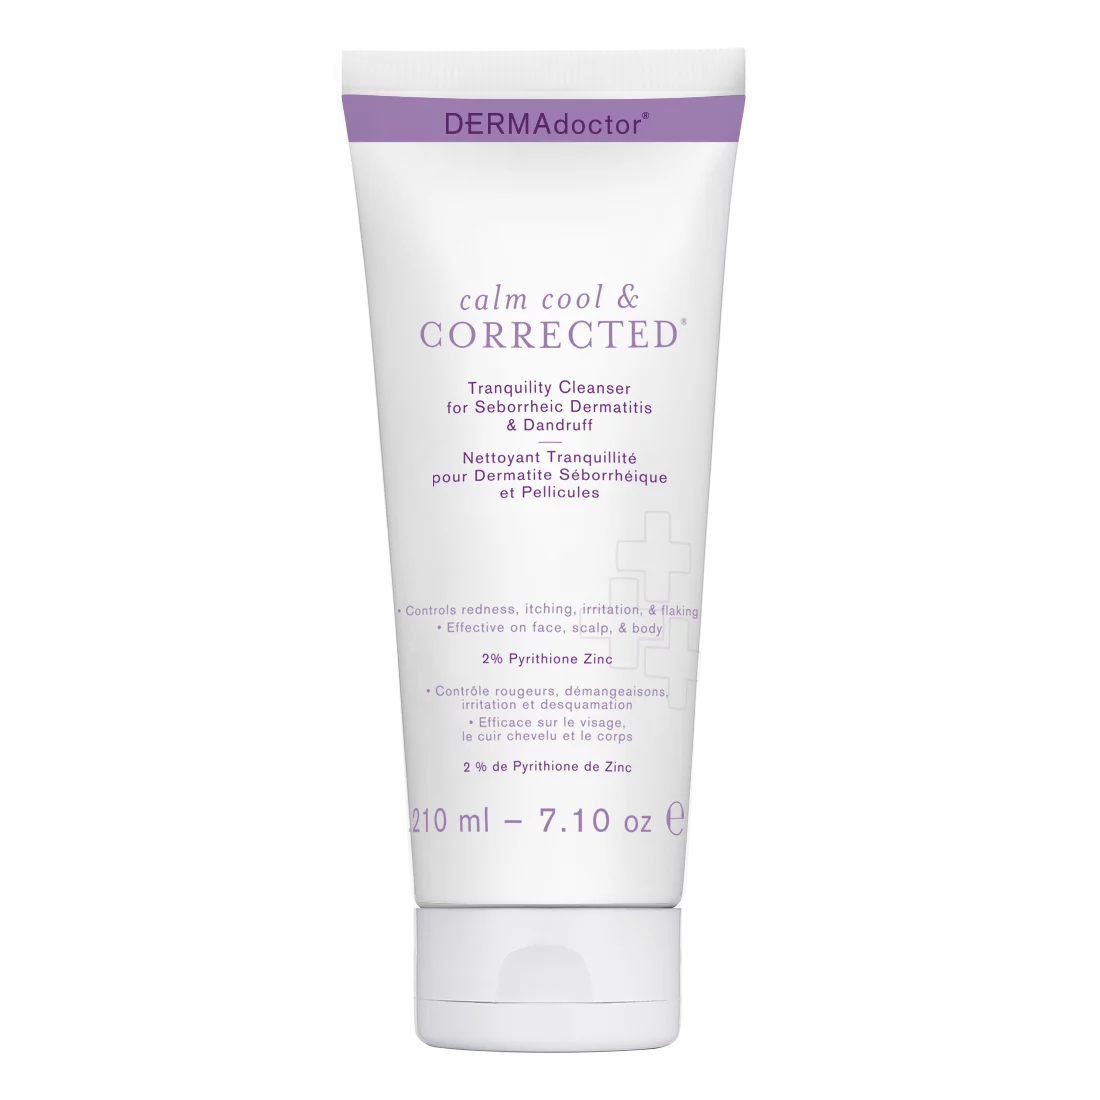 DERMAdoctor Calm Cool + Corrected Tranquility Cleanser